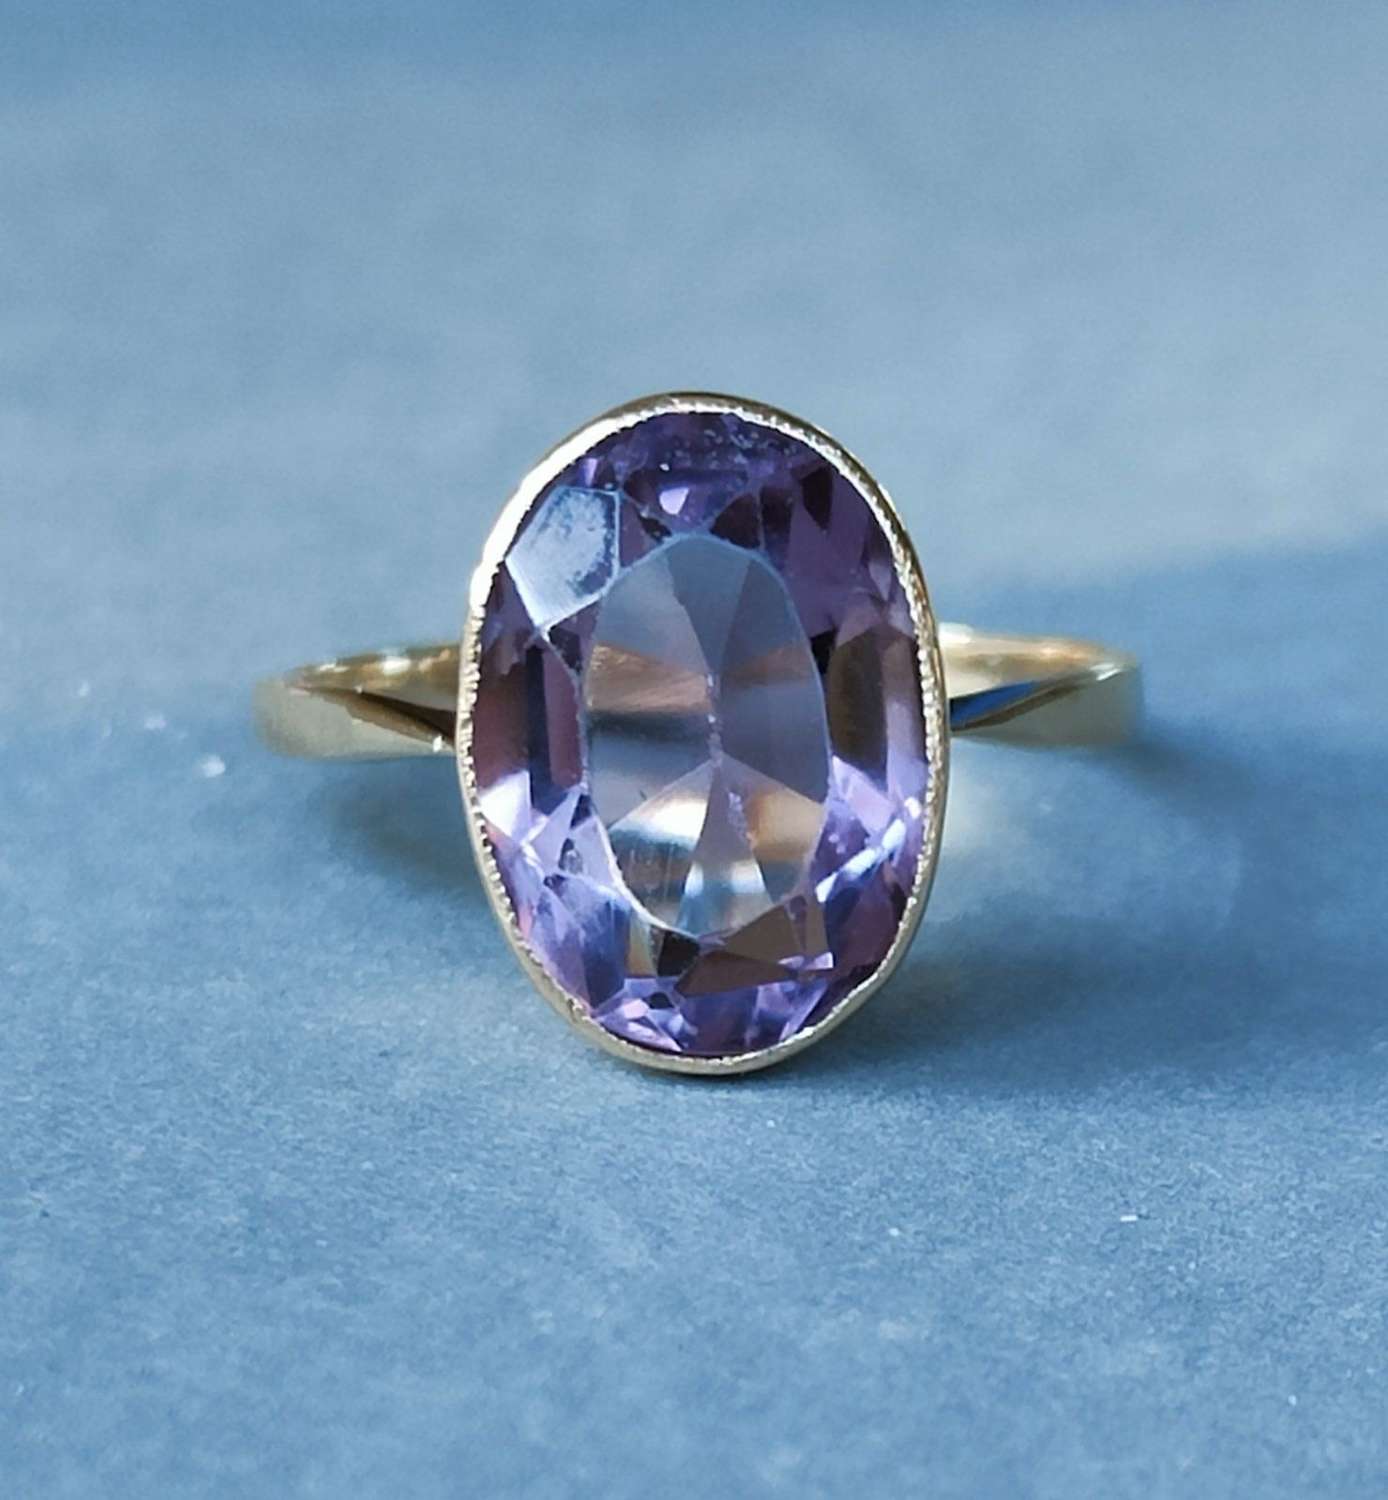 Antique 9ct gold amethyst statement ring